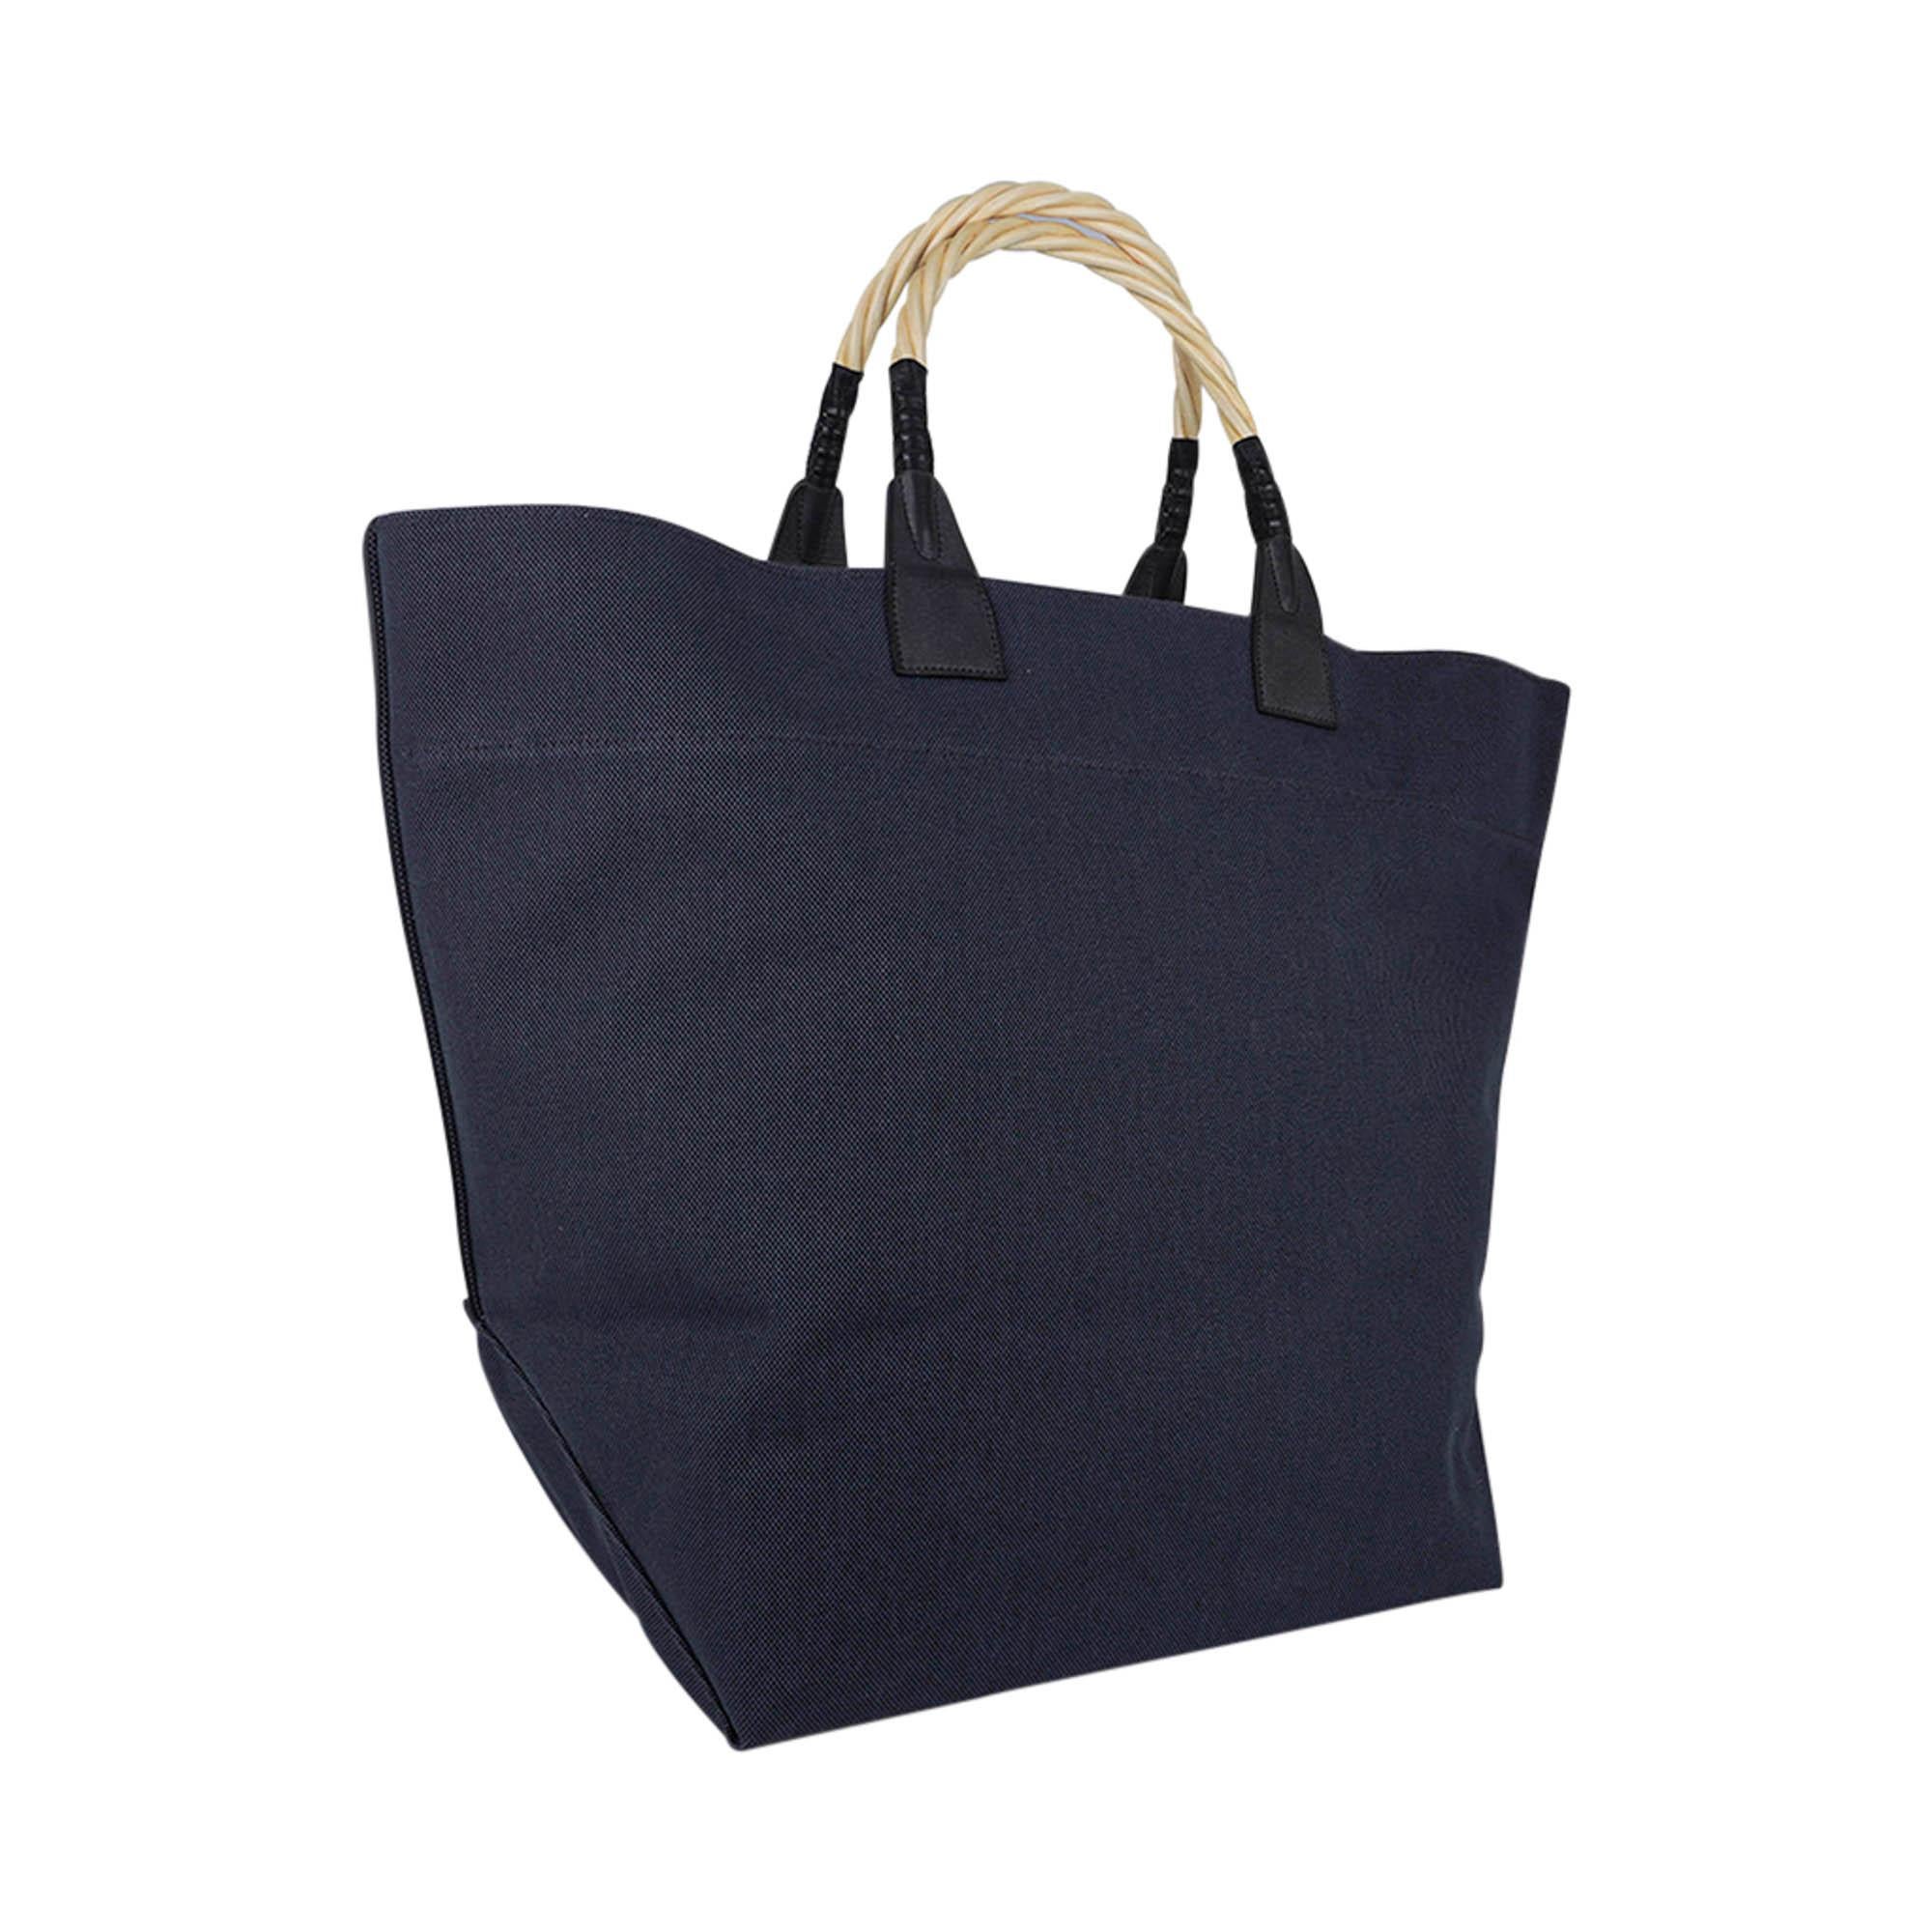 Mightychic offers a Guaranteed authentic limited edition Hermes Steeple Tote bag featured in Marine.
Braided micocoulier (hackberry wood) double handles.
Black leather accents at the handles and on the sides.
Handle leather detail is in the shape of